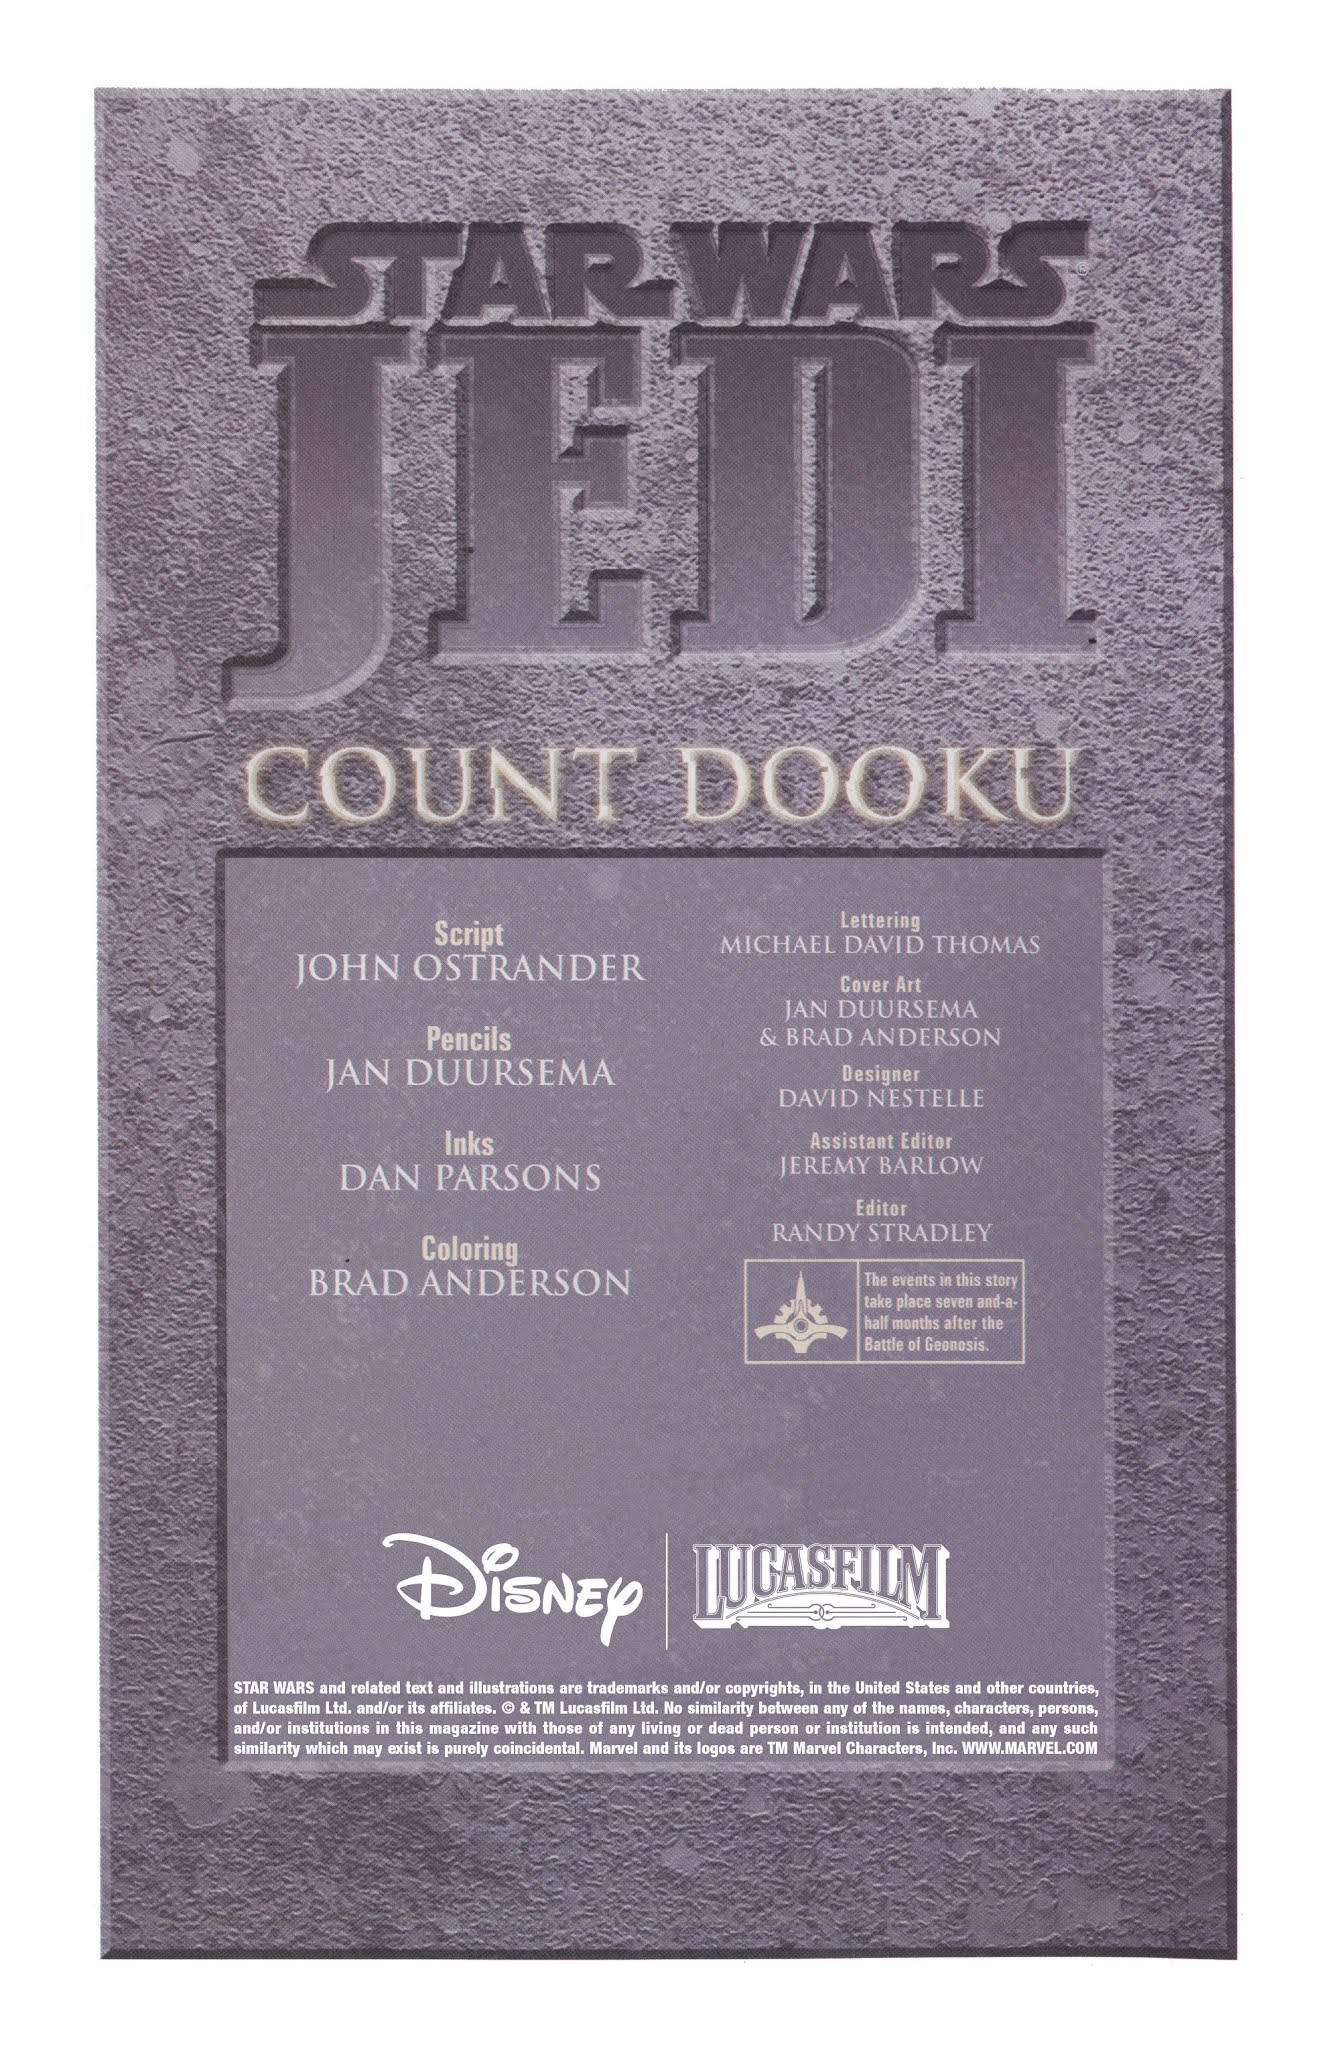 Read online Star Wars: Jedi comic -  Issue # Issue Count Dooku - 2